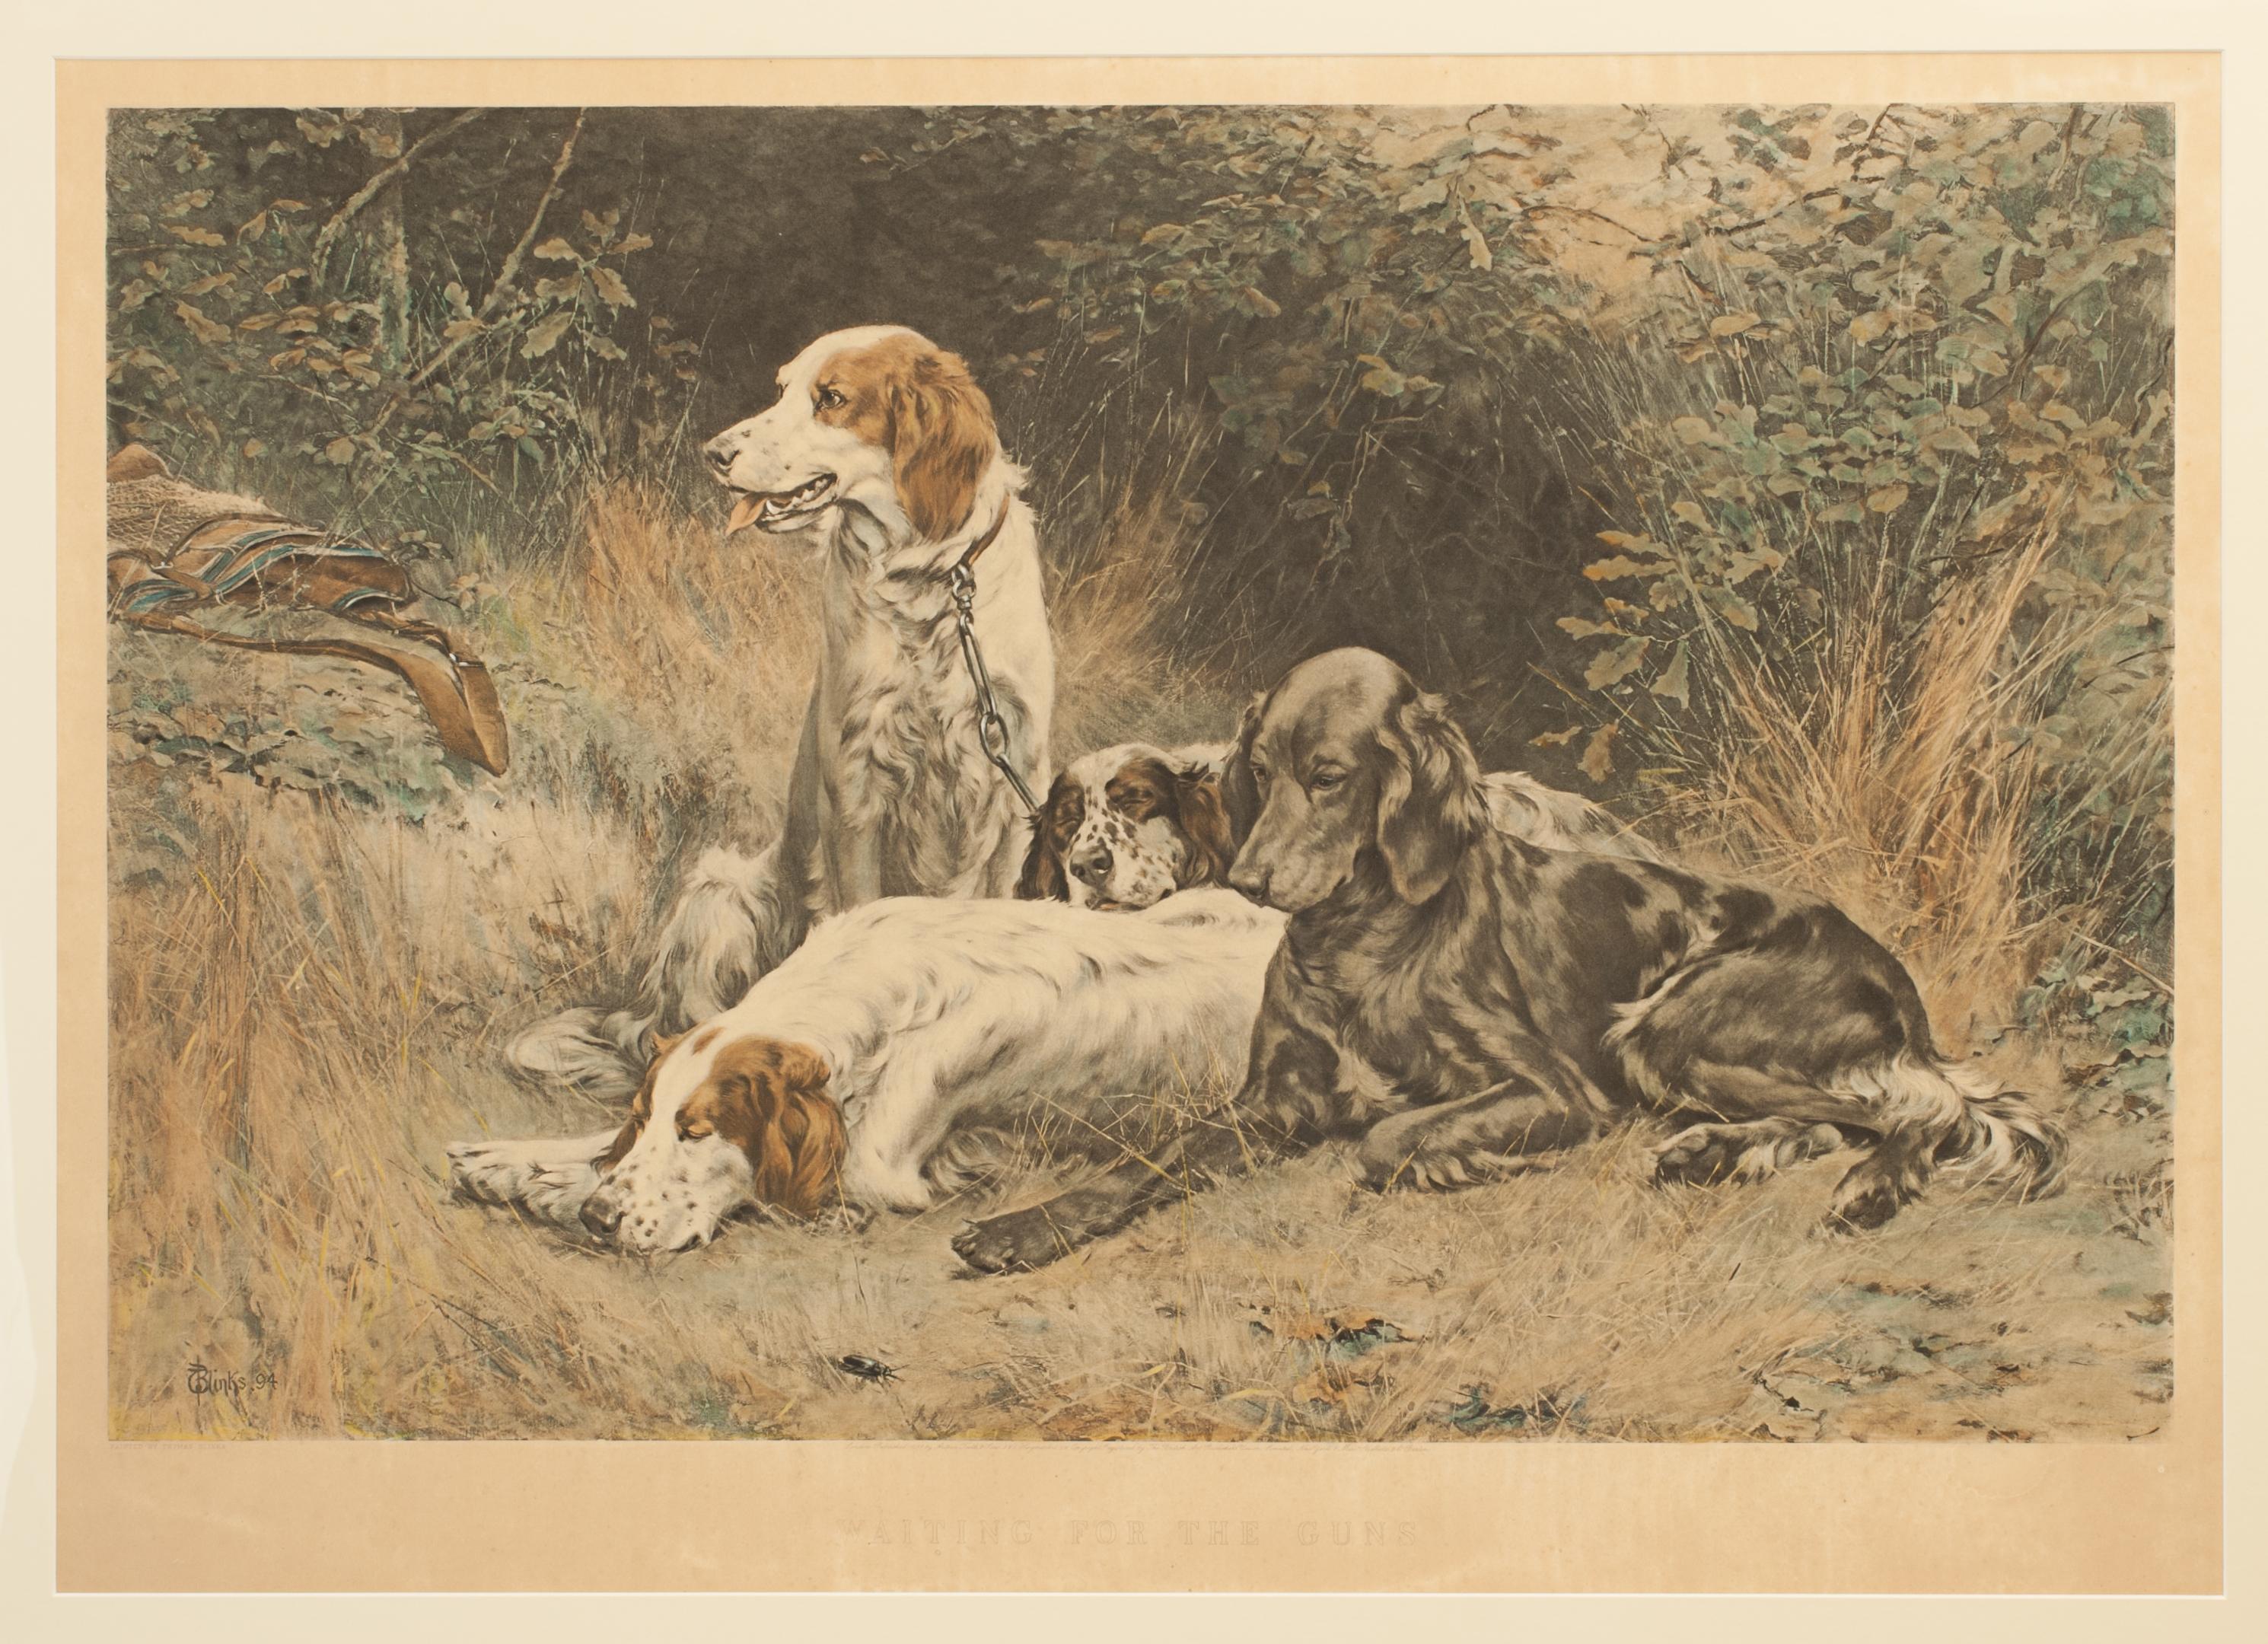 Thomas Blinks Photogravure, Waiting For The Guns.
A wonderful titled colour photogravure of four hunting dogs, setters, after Thomas Blinks original painting, Waiting For The Guns. Framed and mounted in a modern wooden frame with gold slip.